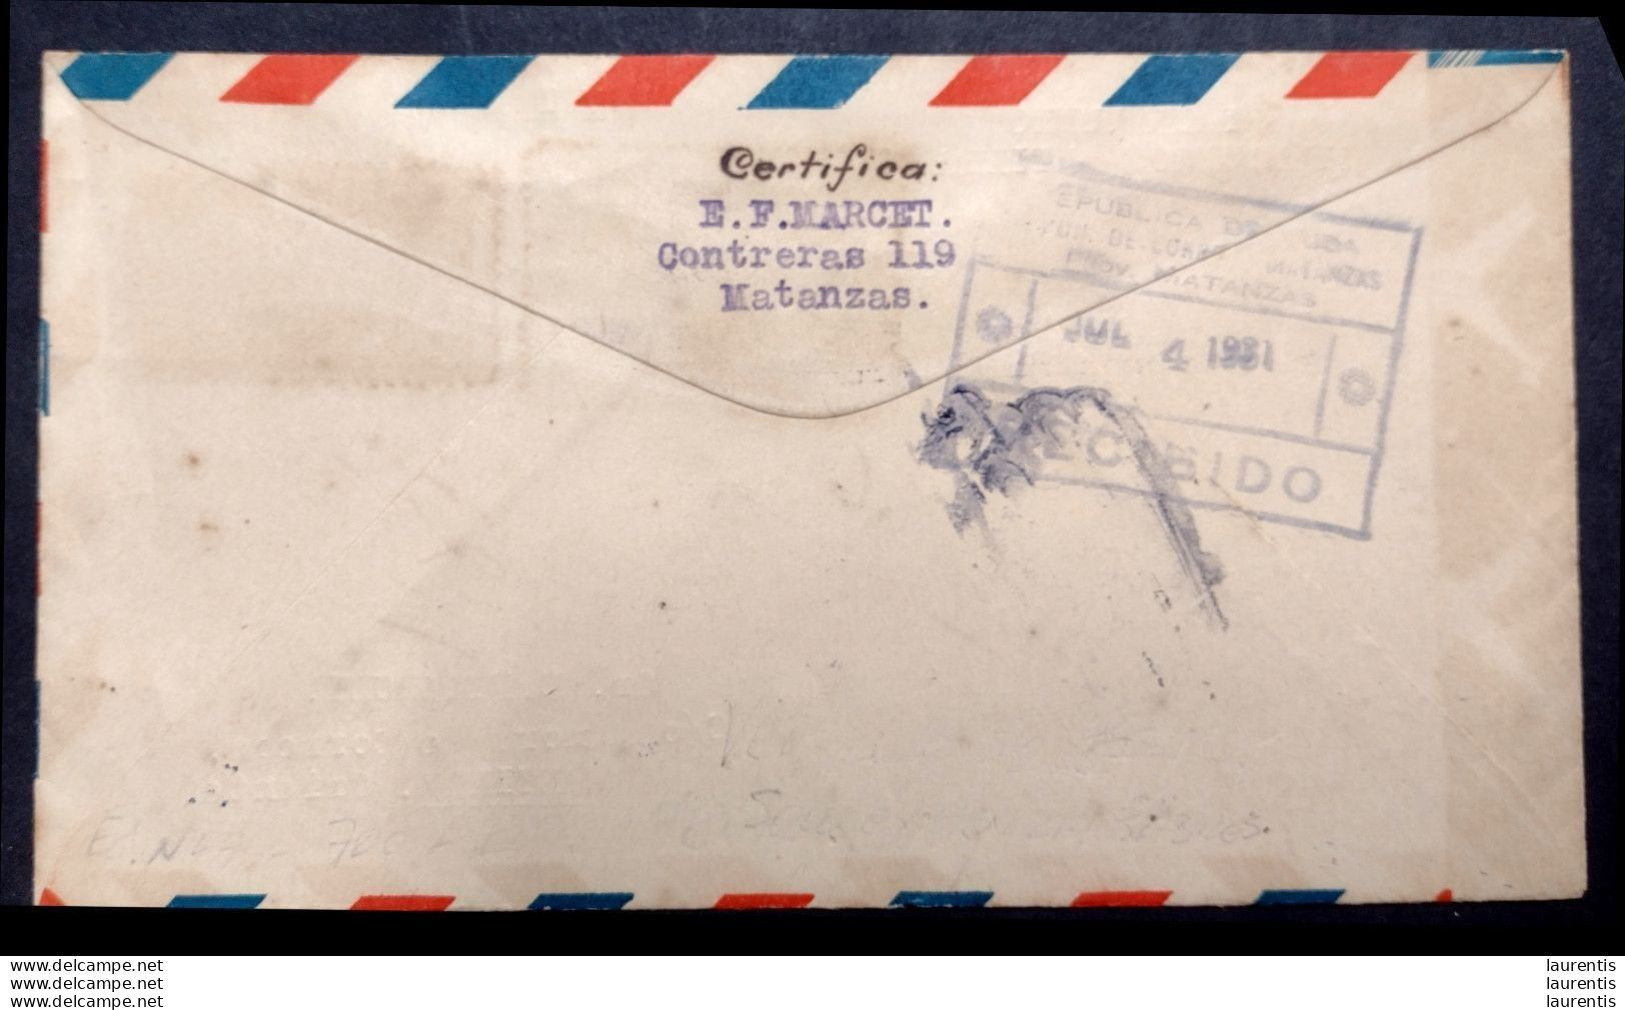 D575. First Flight Cienfuegos-Antilla - Registered On July 1st, 1931 - Only 14 Covers Are Known - 215,00 - Luchtpost